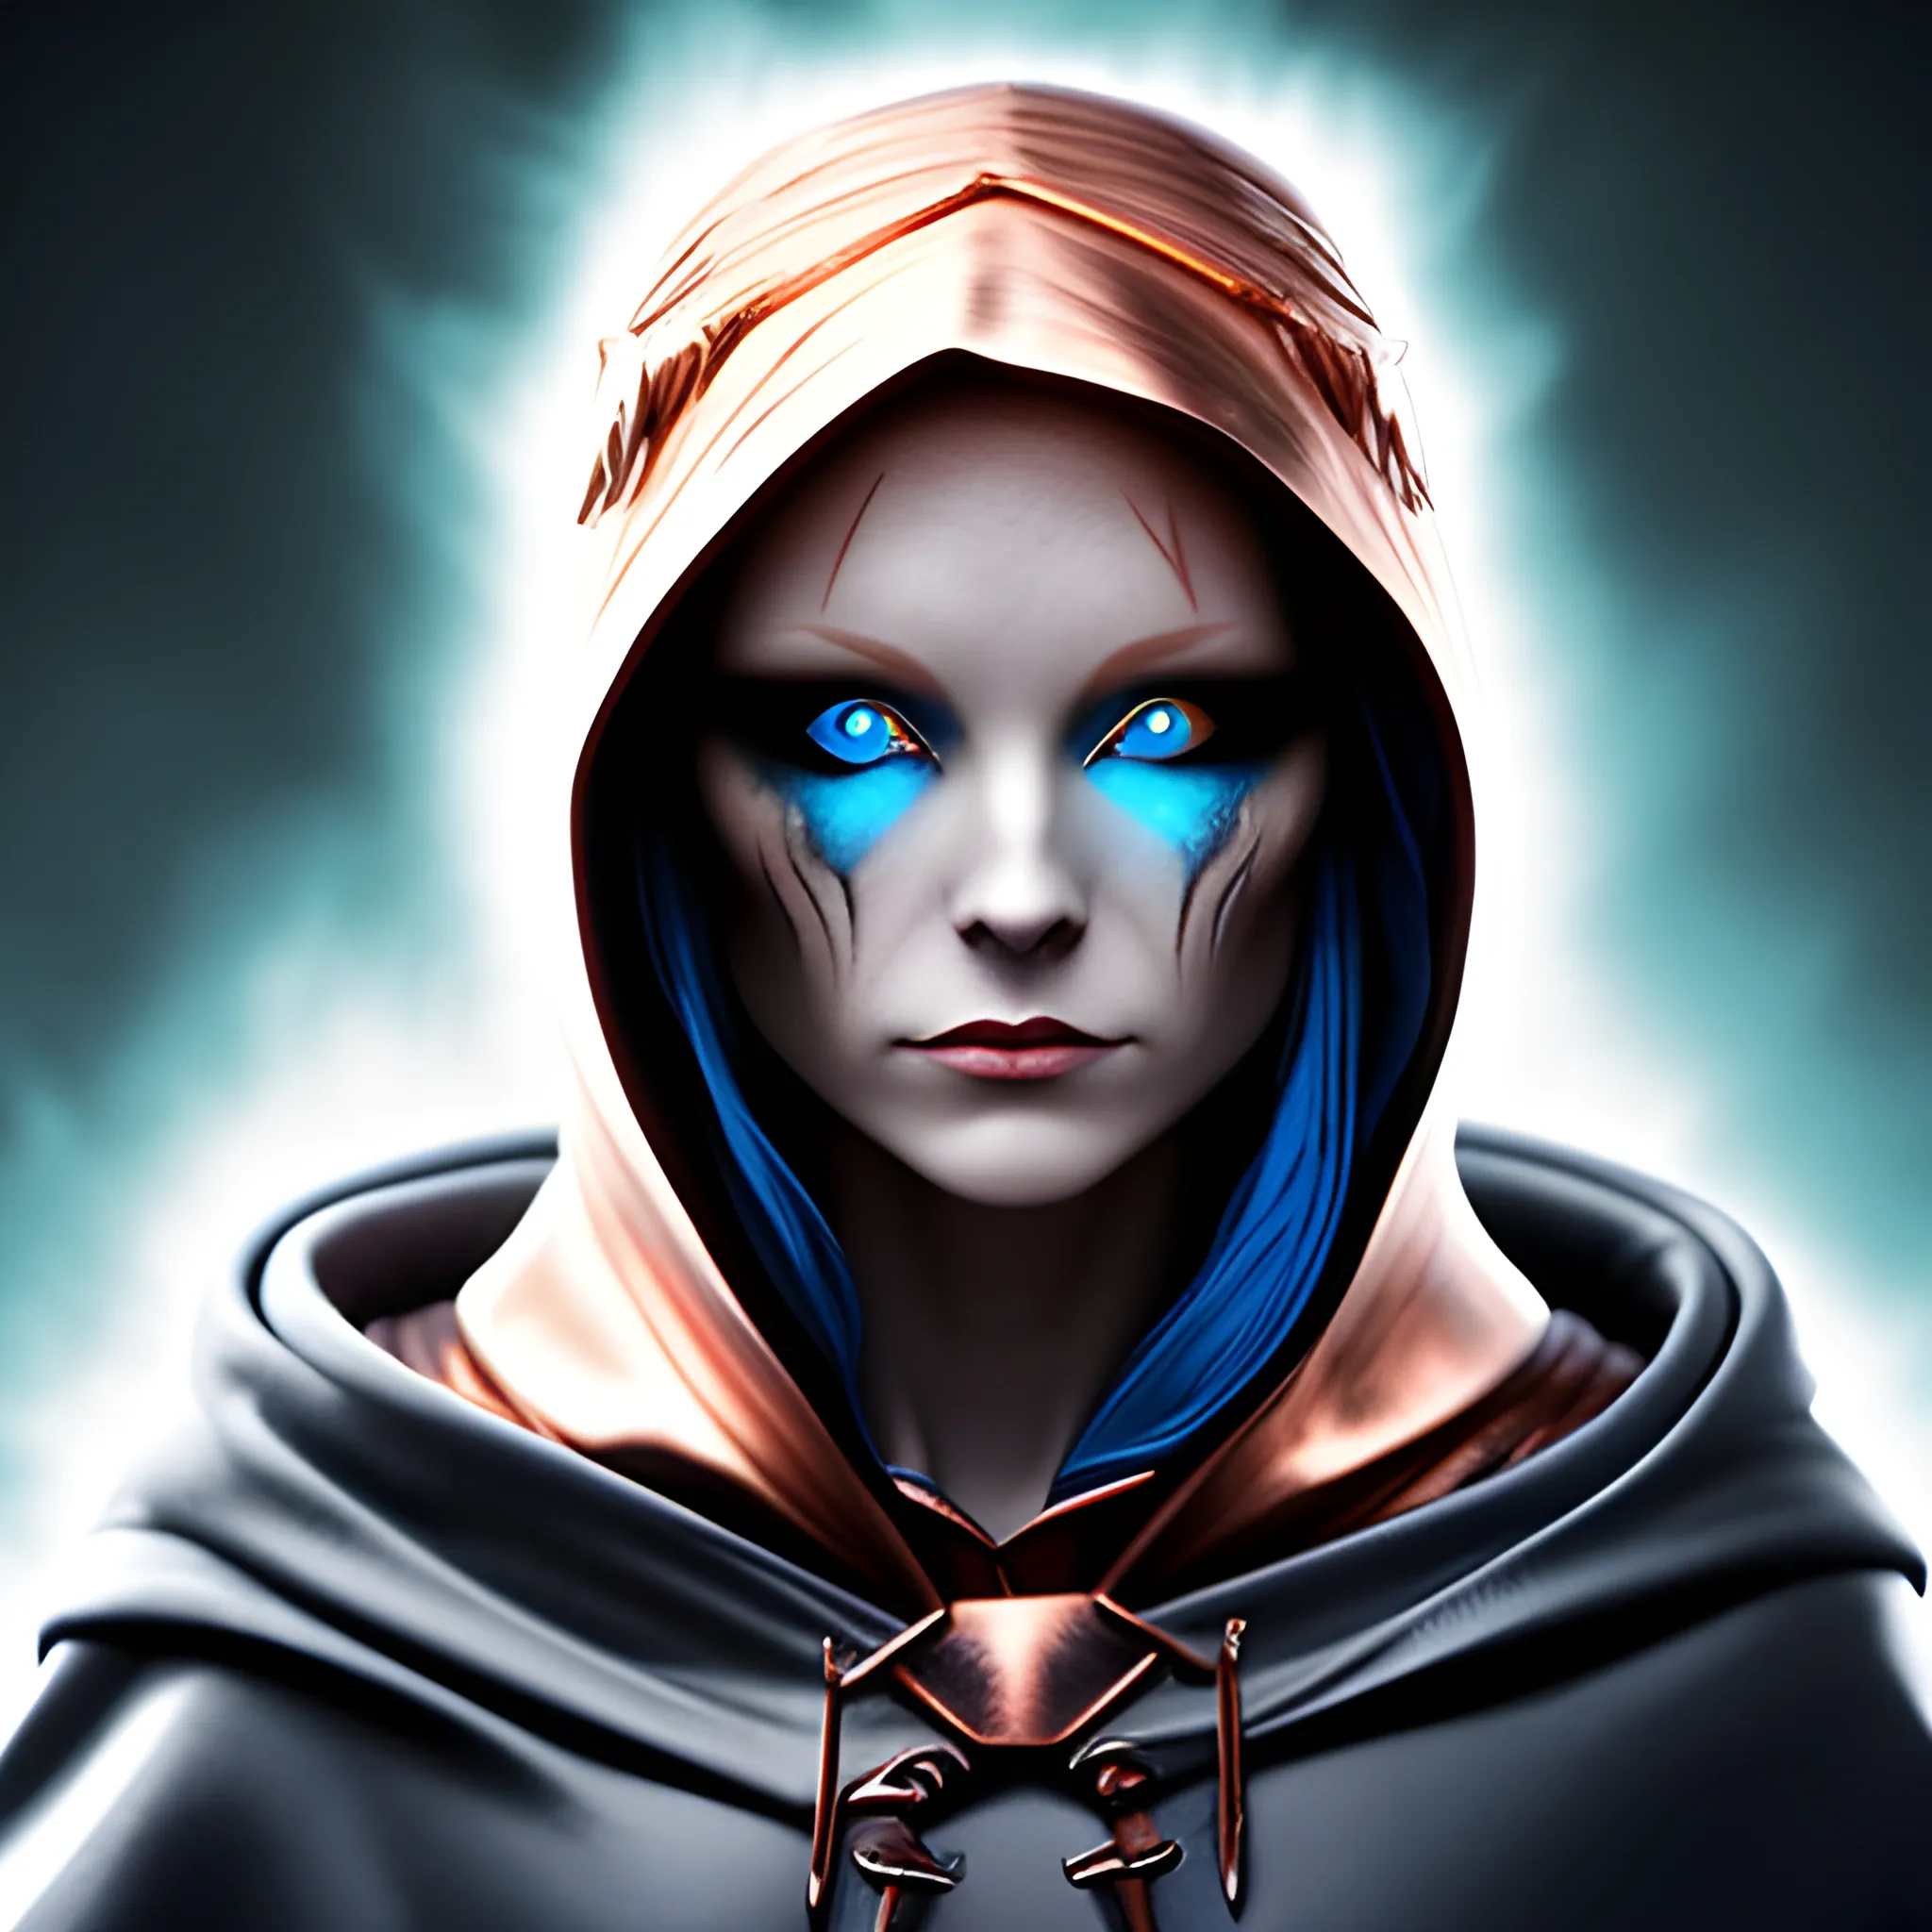 dark fantasy female with copper hair, glowing blue eyes, and hooded cloak